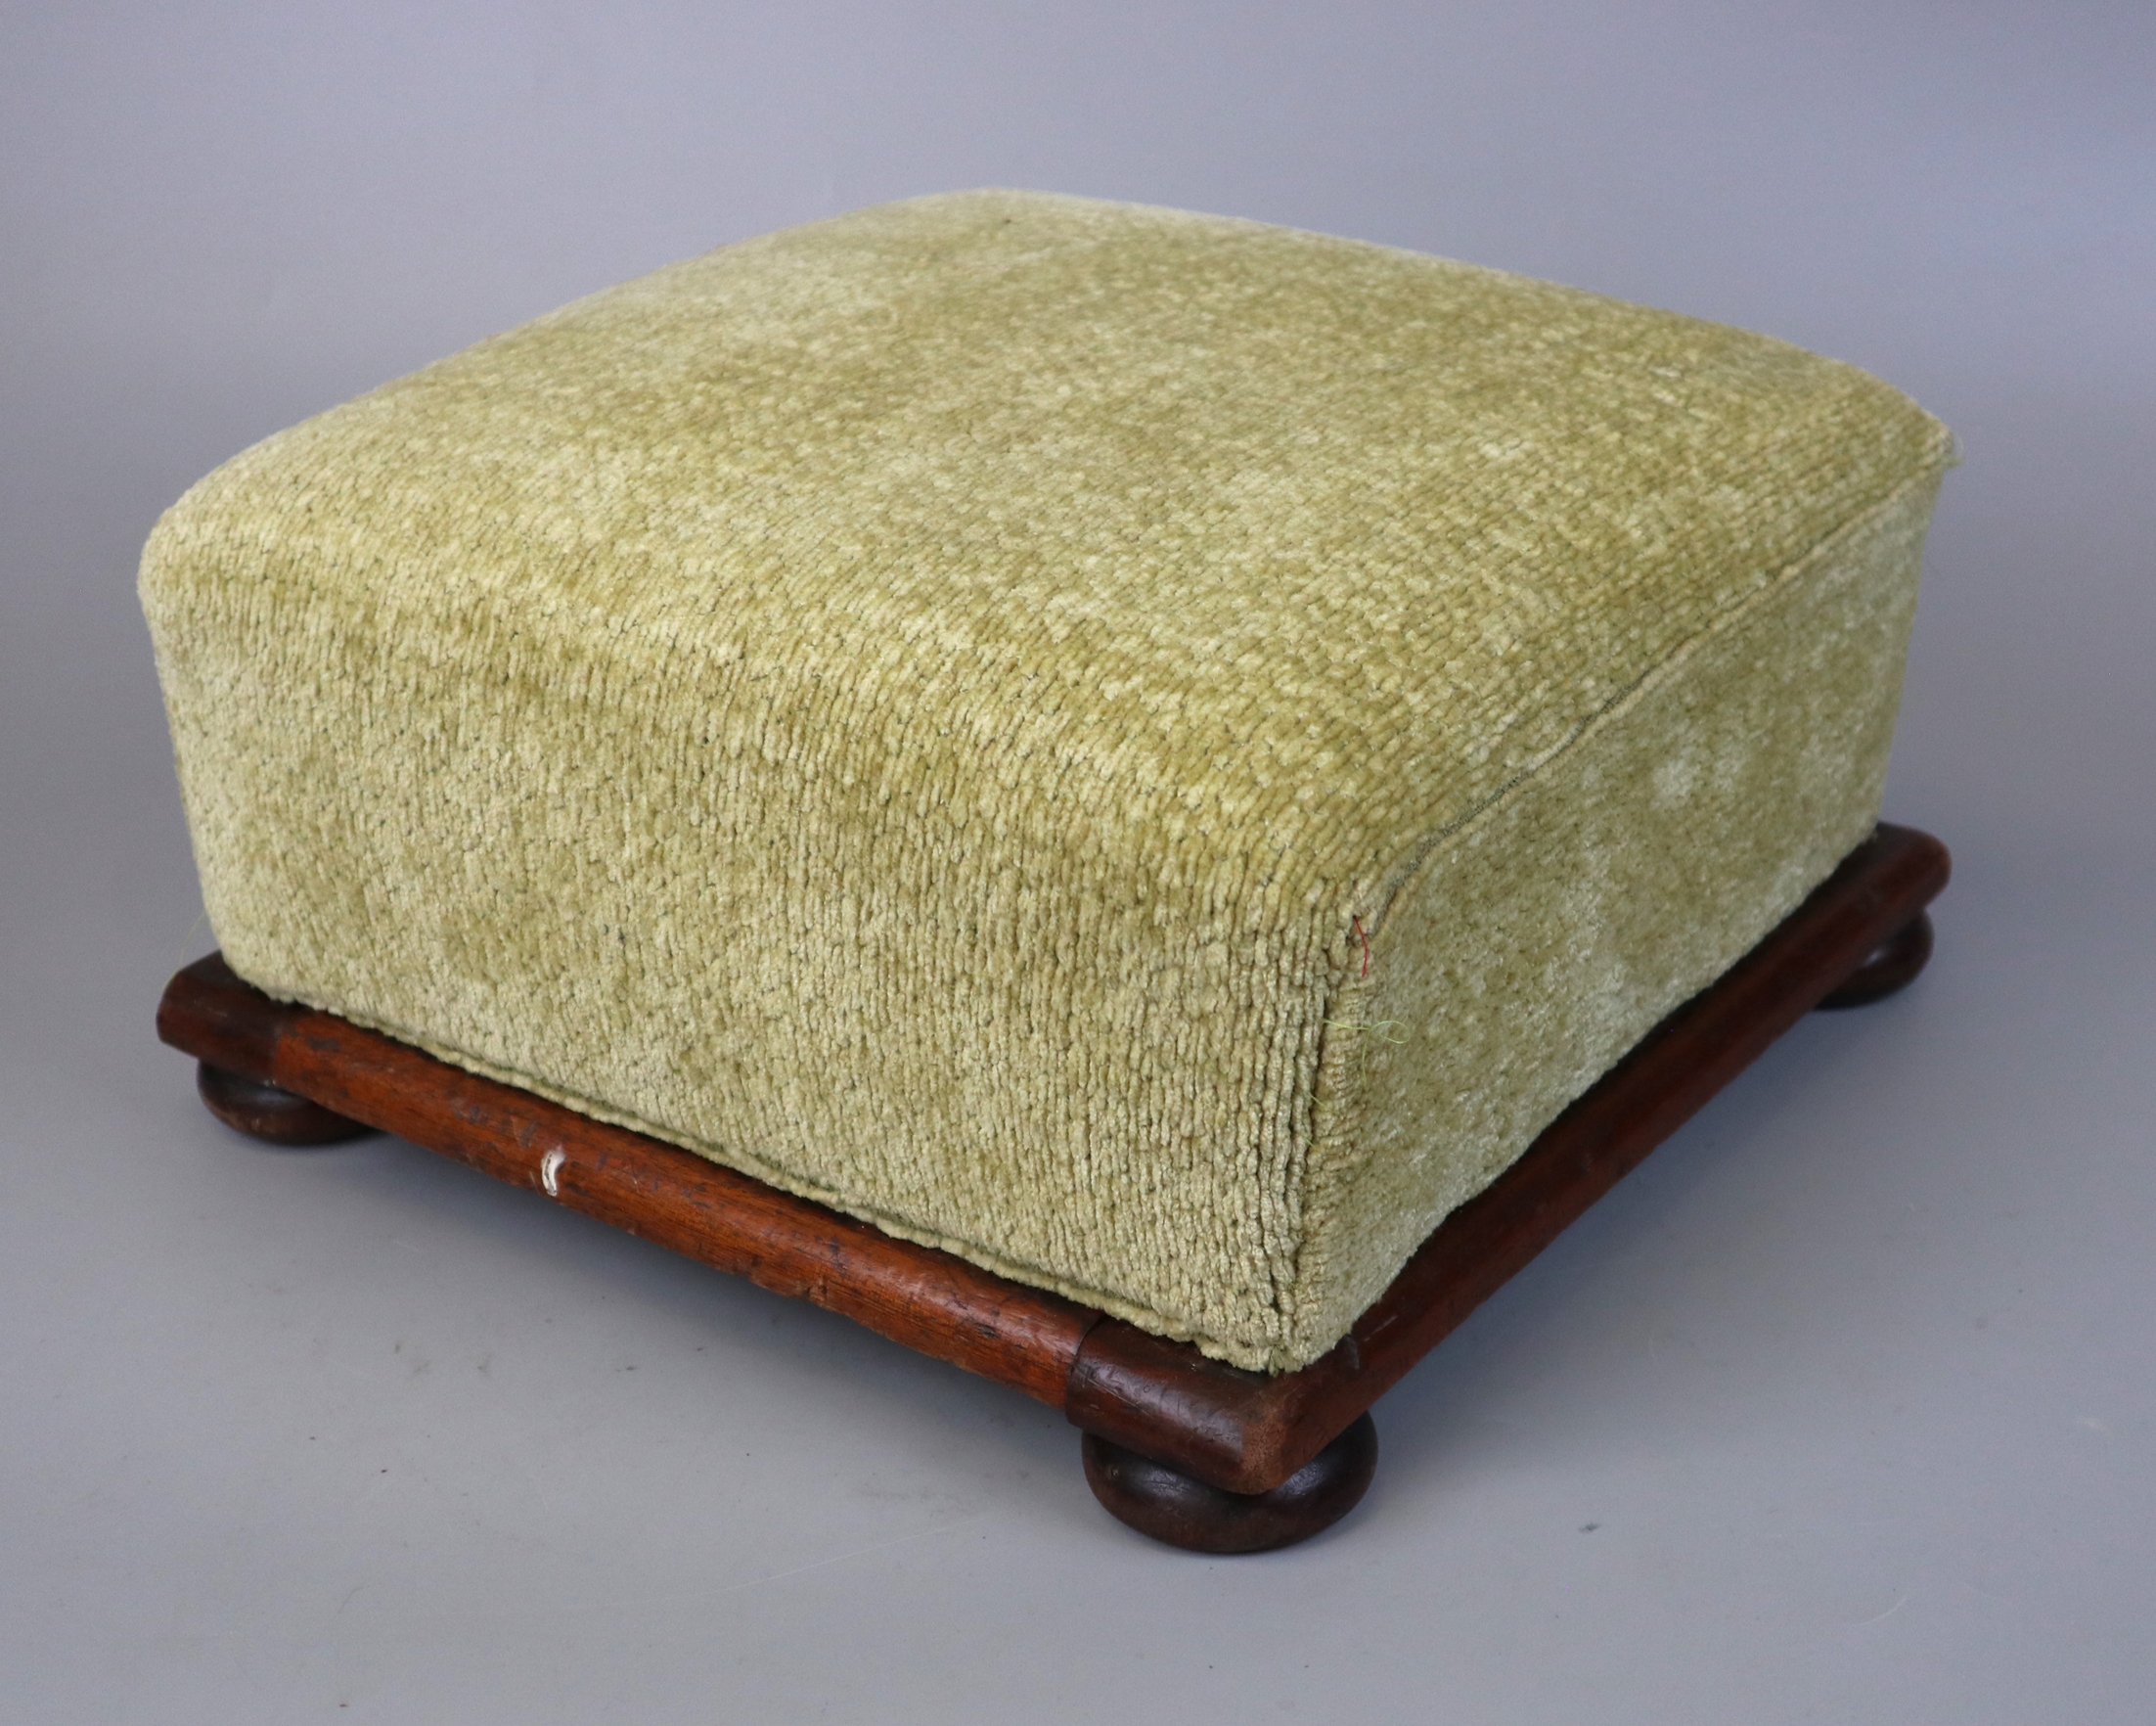 2 antique footstools - Image 3 of 3